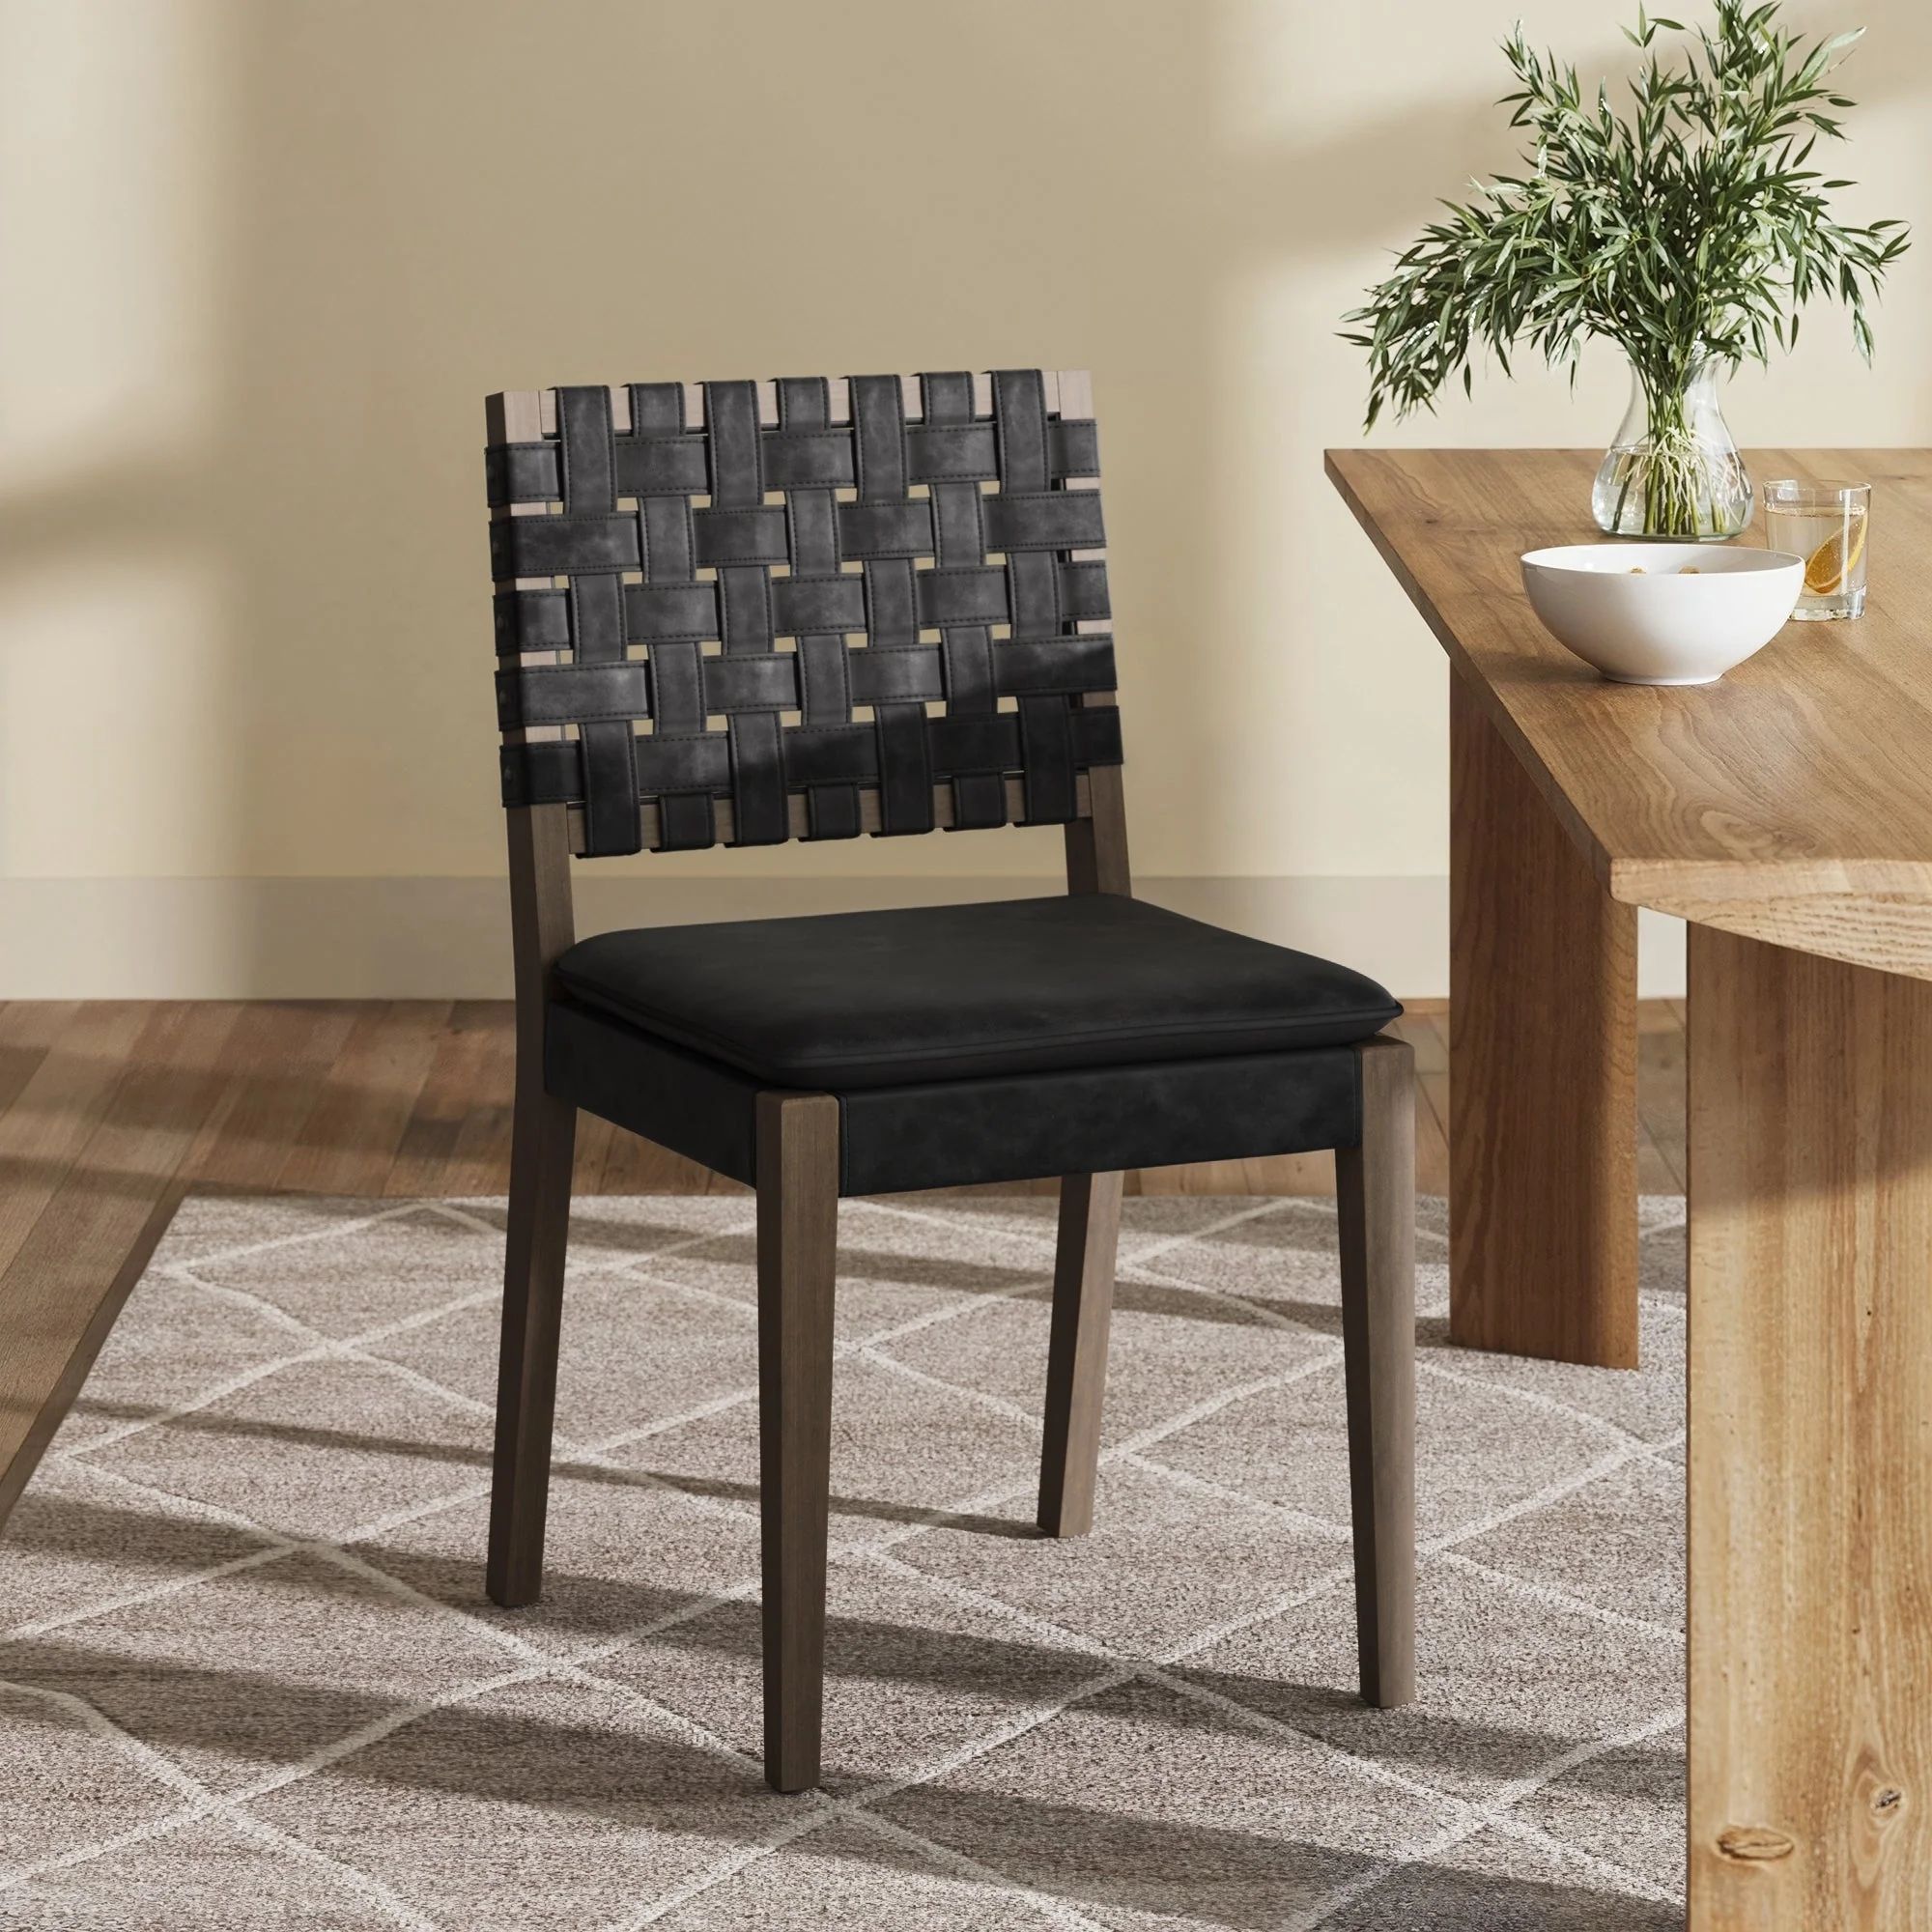 Woven Faux Leather Dining Chair Black | Nathan James